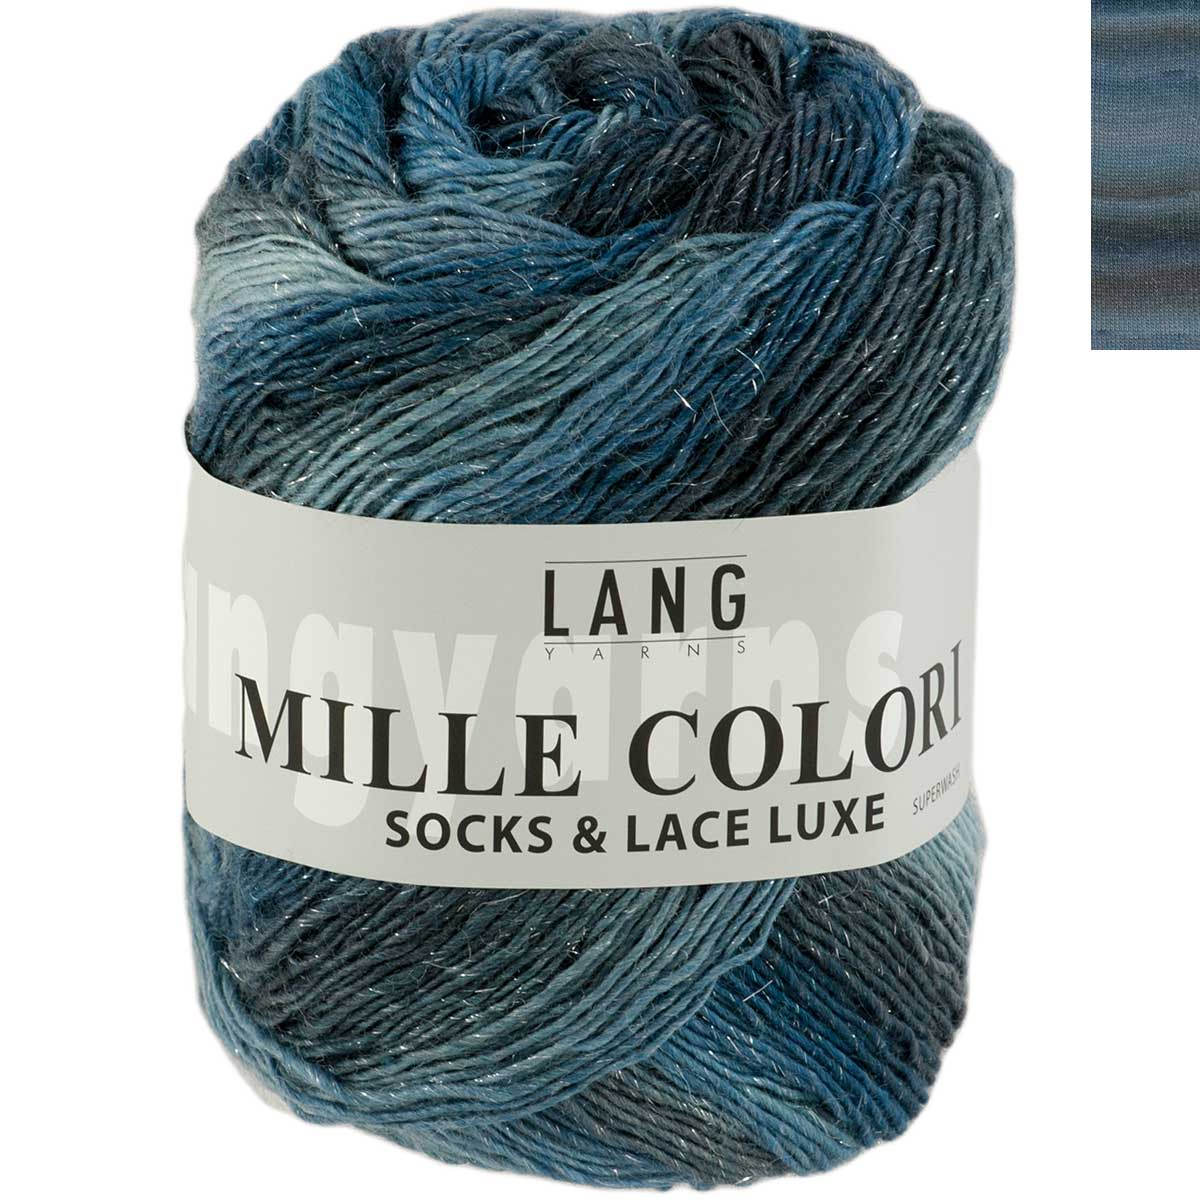 Lang Yarns Mille Colori Socks & Lace Luxe Farbe 78